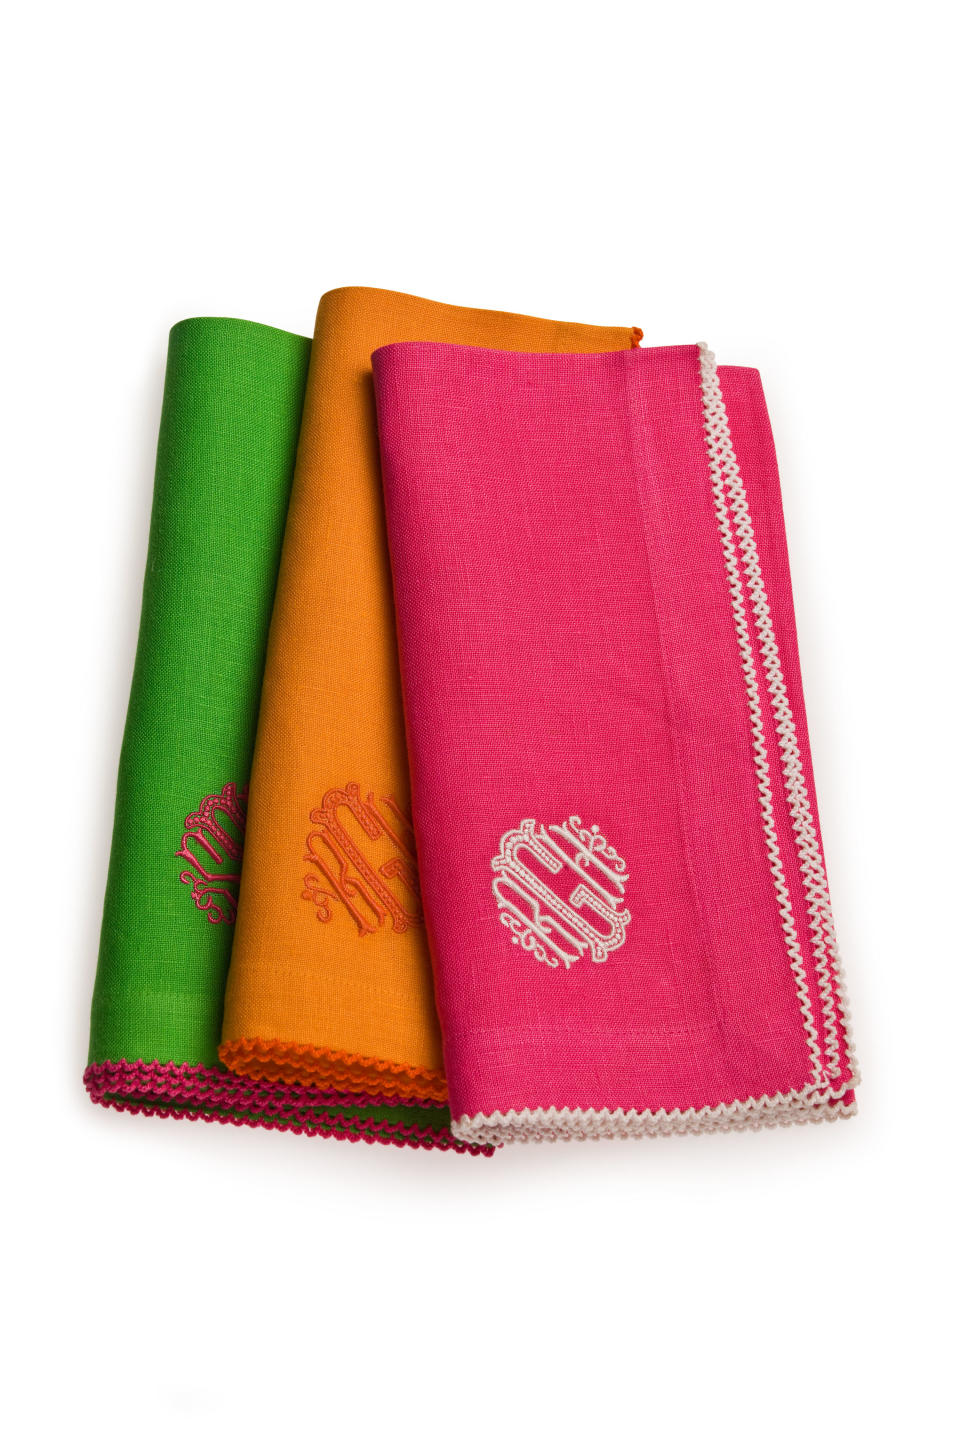 Monogrammed Napkins by Daisy Hill